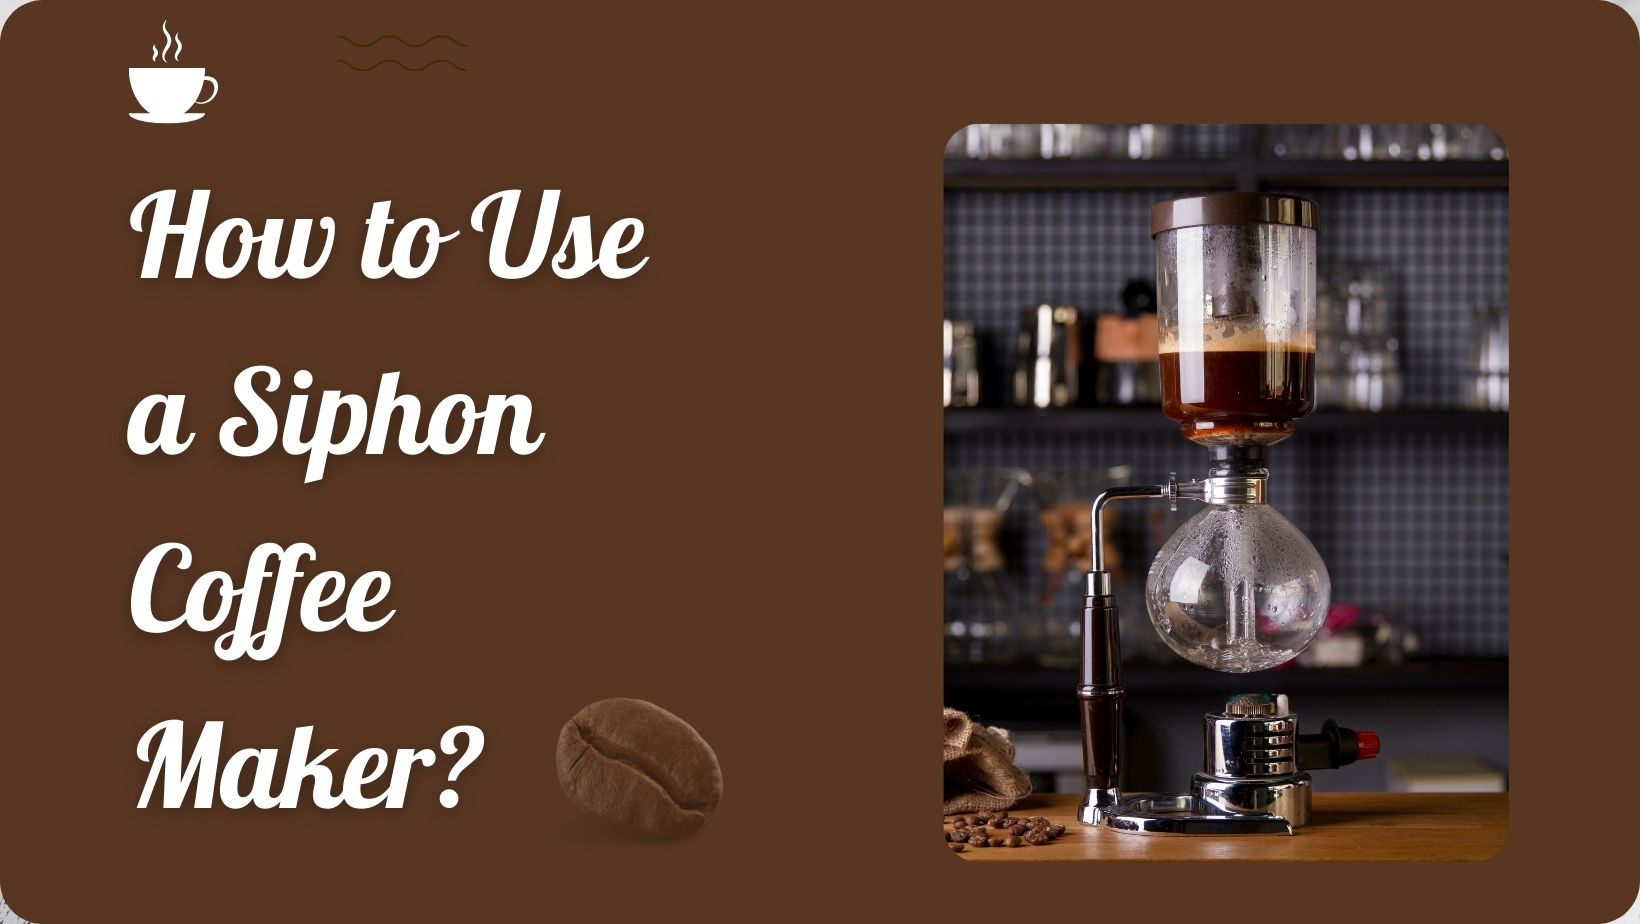 How to Use a Siphon Coffee Maker?